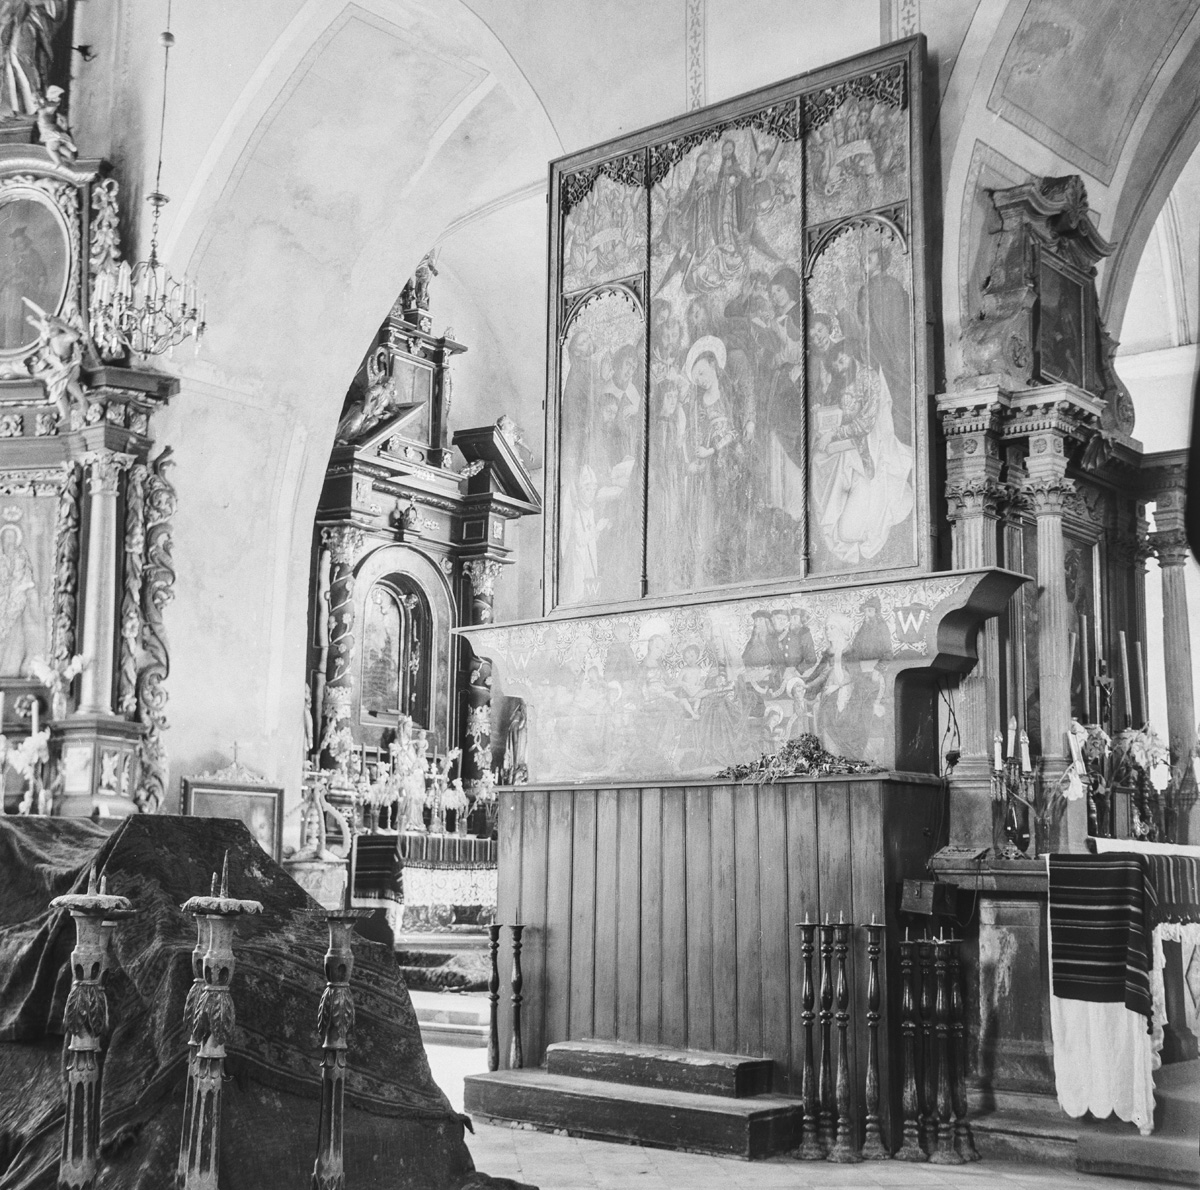 Triptych in the church